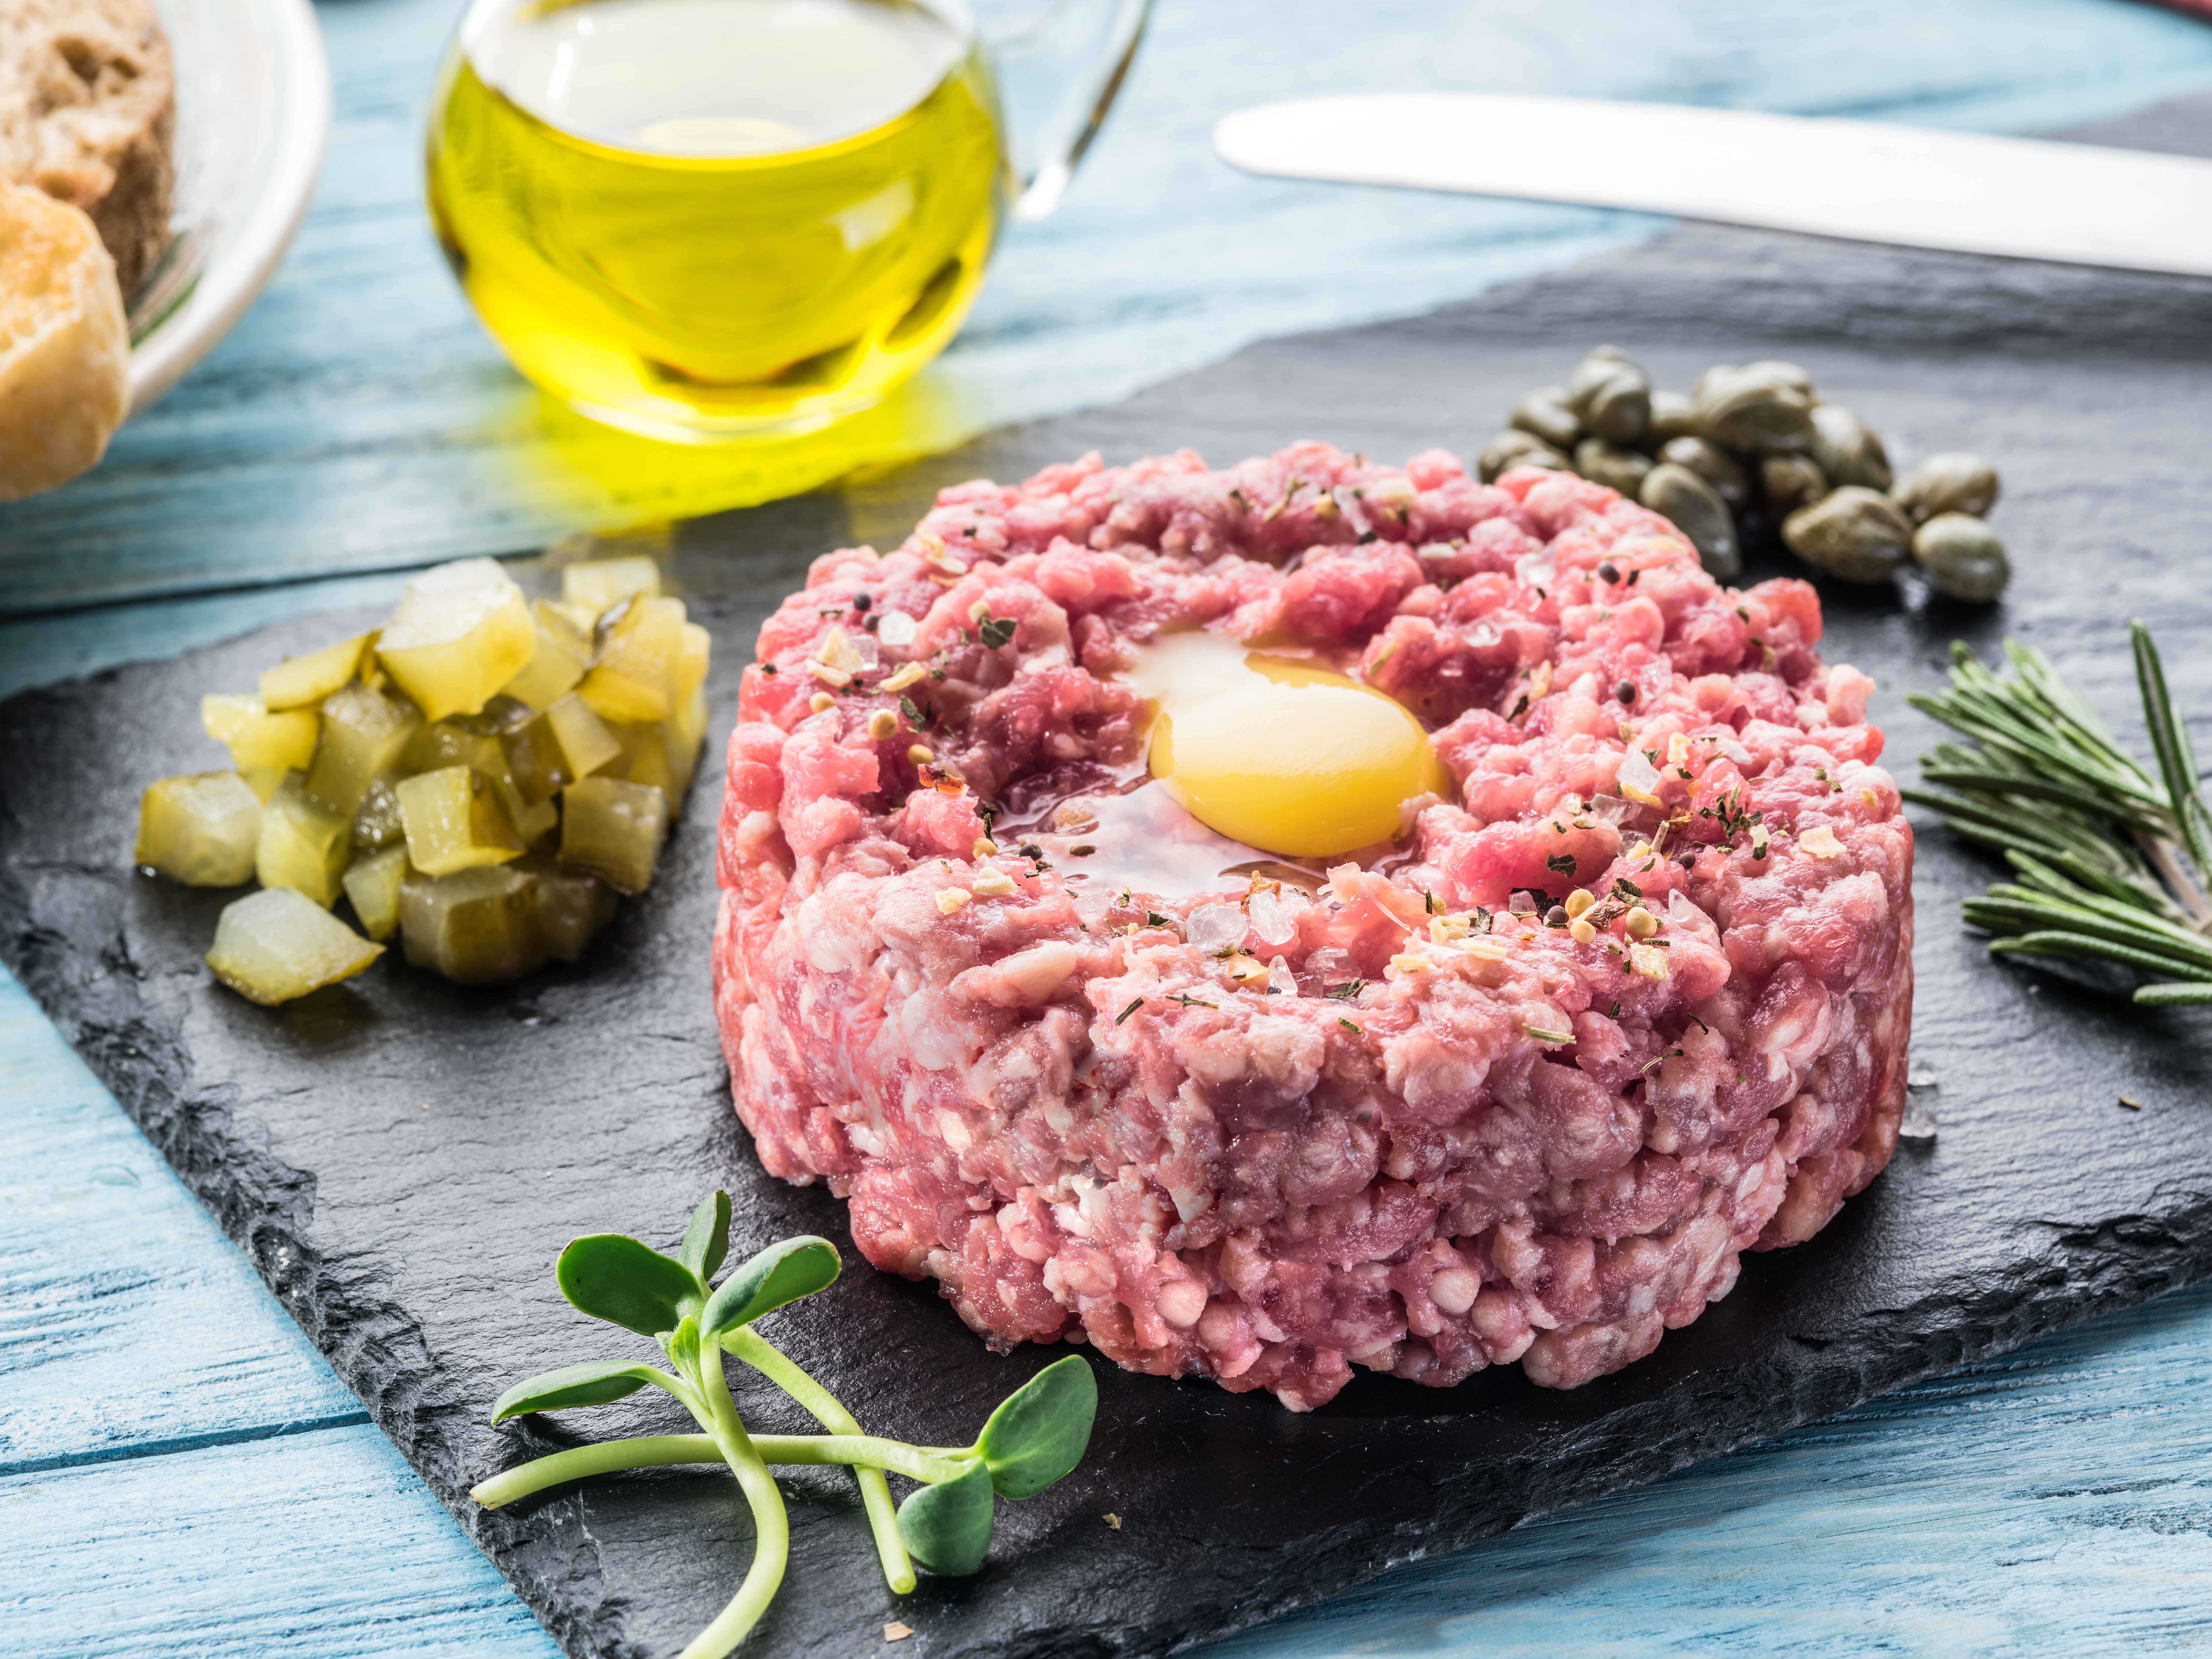 Steak tartare served with raw quail egg yolk, capers and bread. Meat dish.